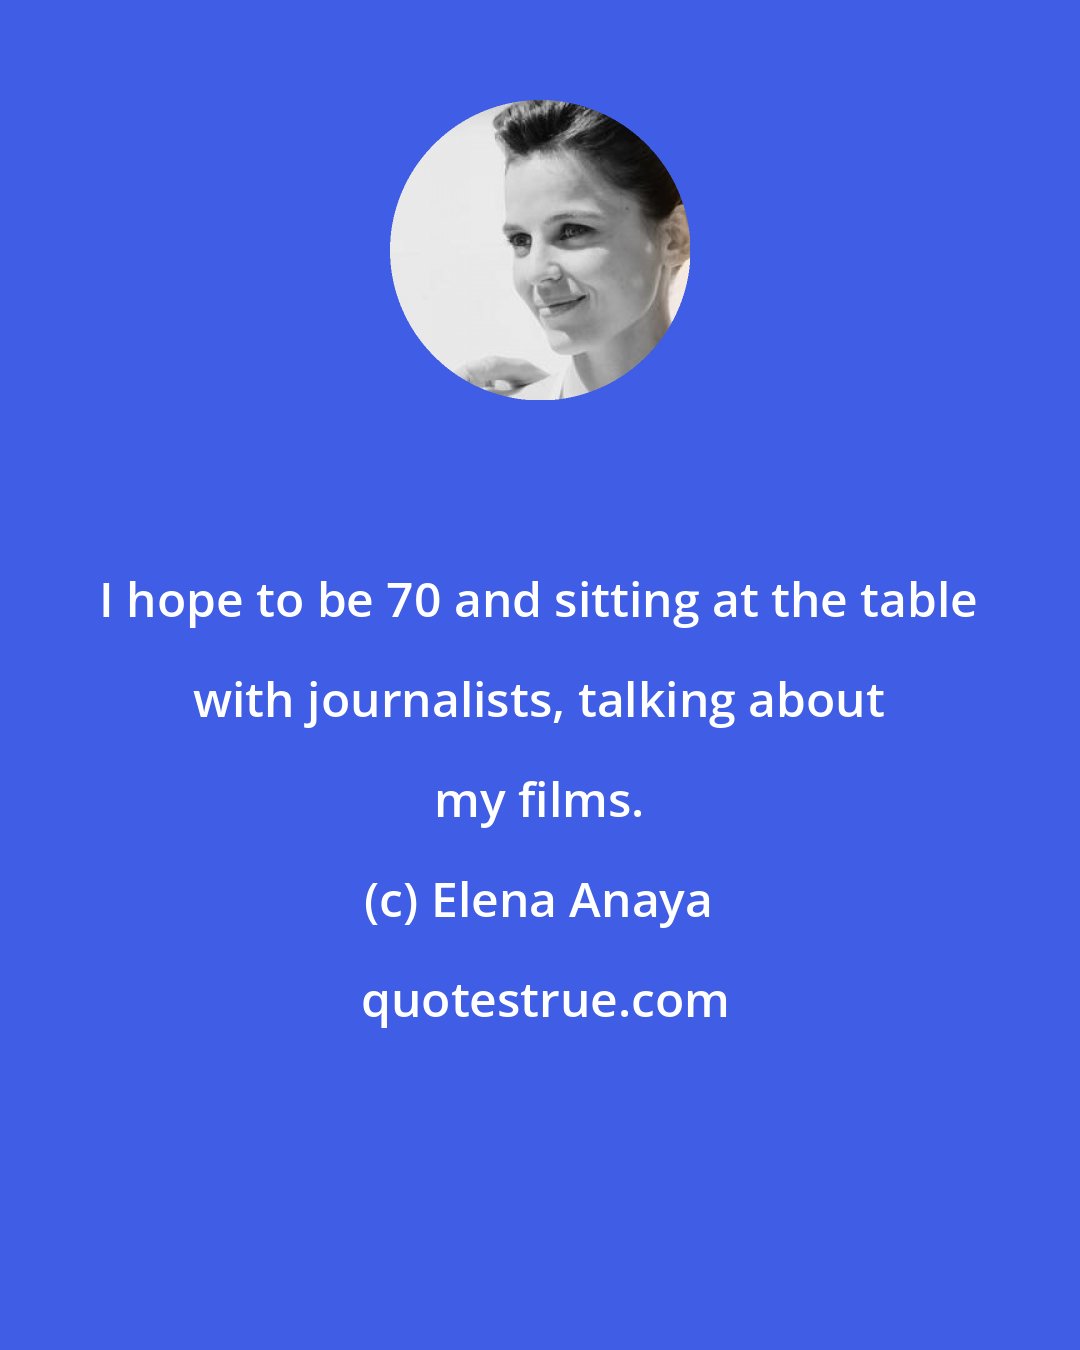 Elena Anaya: I hope to be 70 and sitting at the table with journalists, talking about my films.